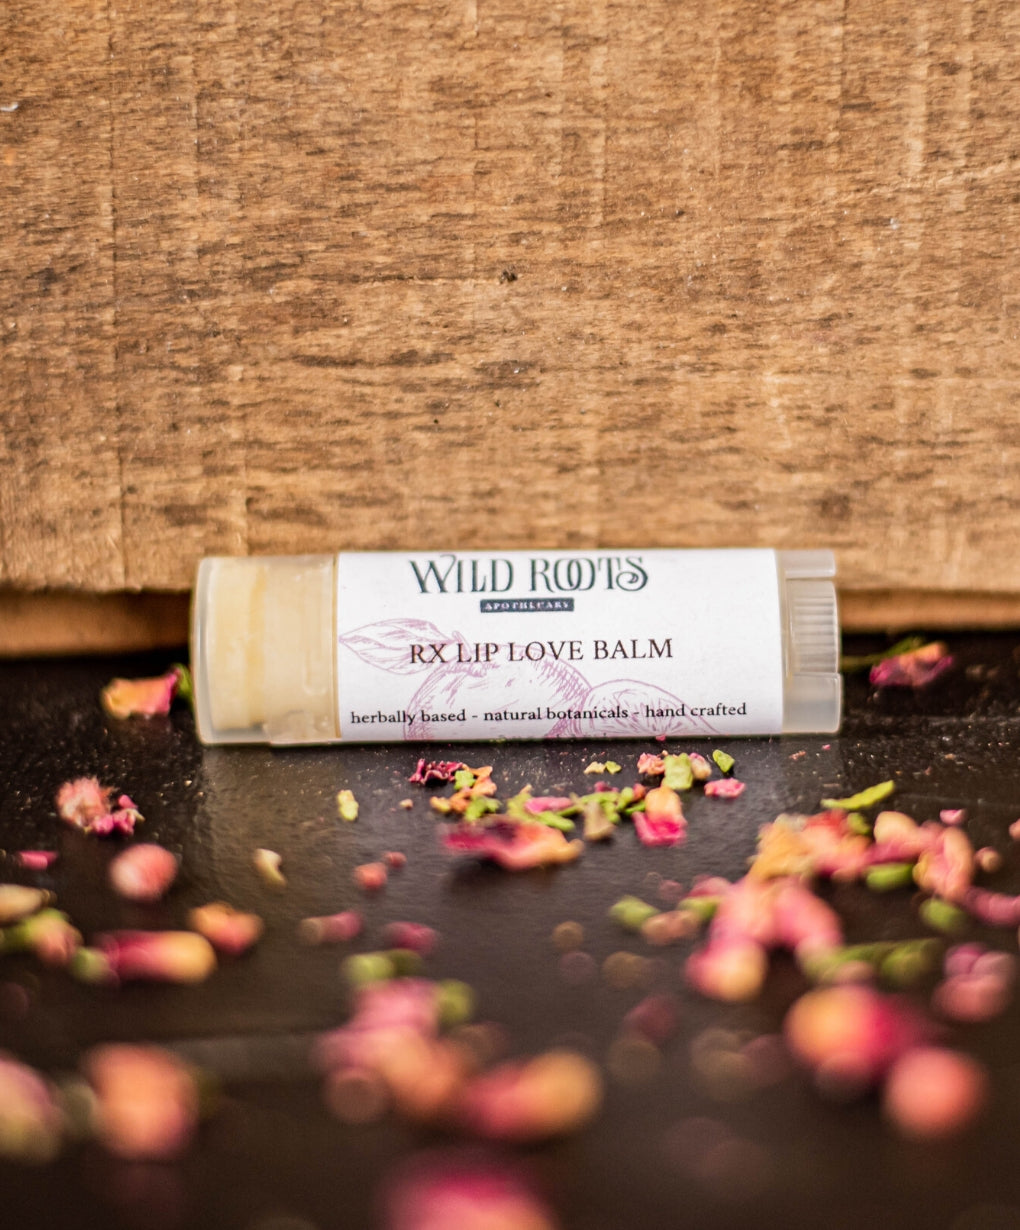 Brighten and Boost Lip Love Balm—Wild Roots Apothecary